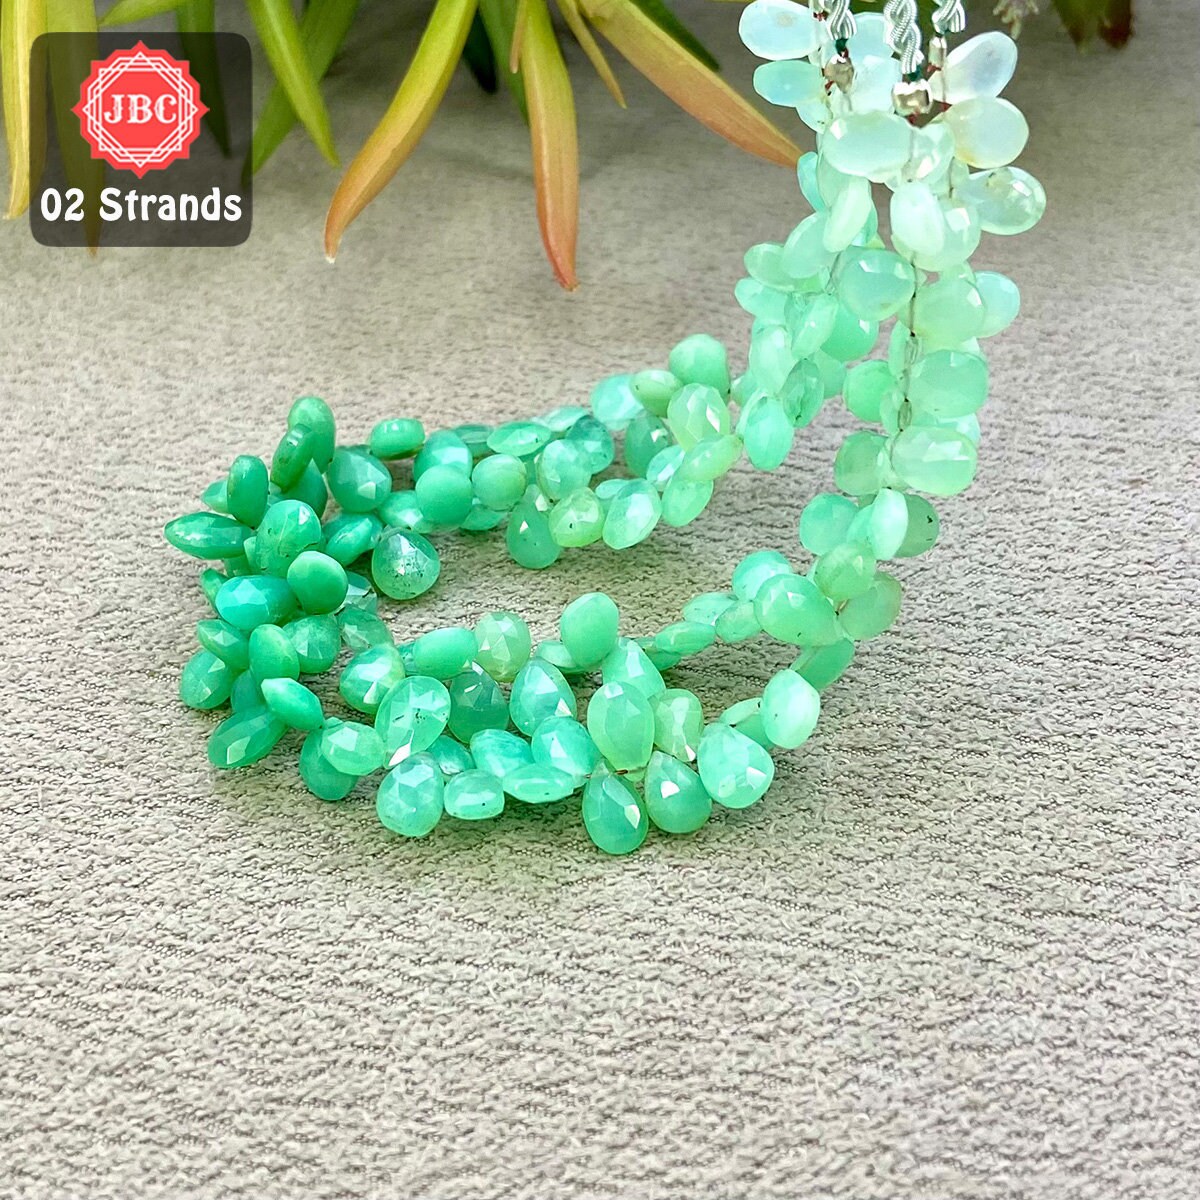 8 Inches Faceted Chrysoprase Pear Beads Natural Chrysoprase Gemstone Briolette Beads Size 5 To 7 mm Top Quality